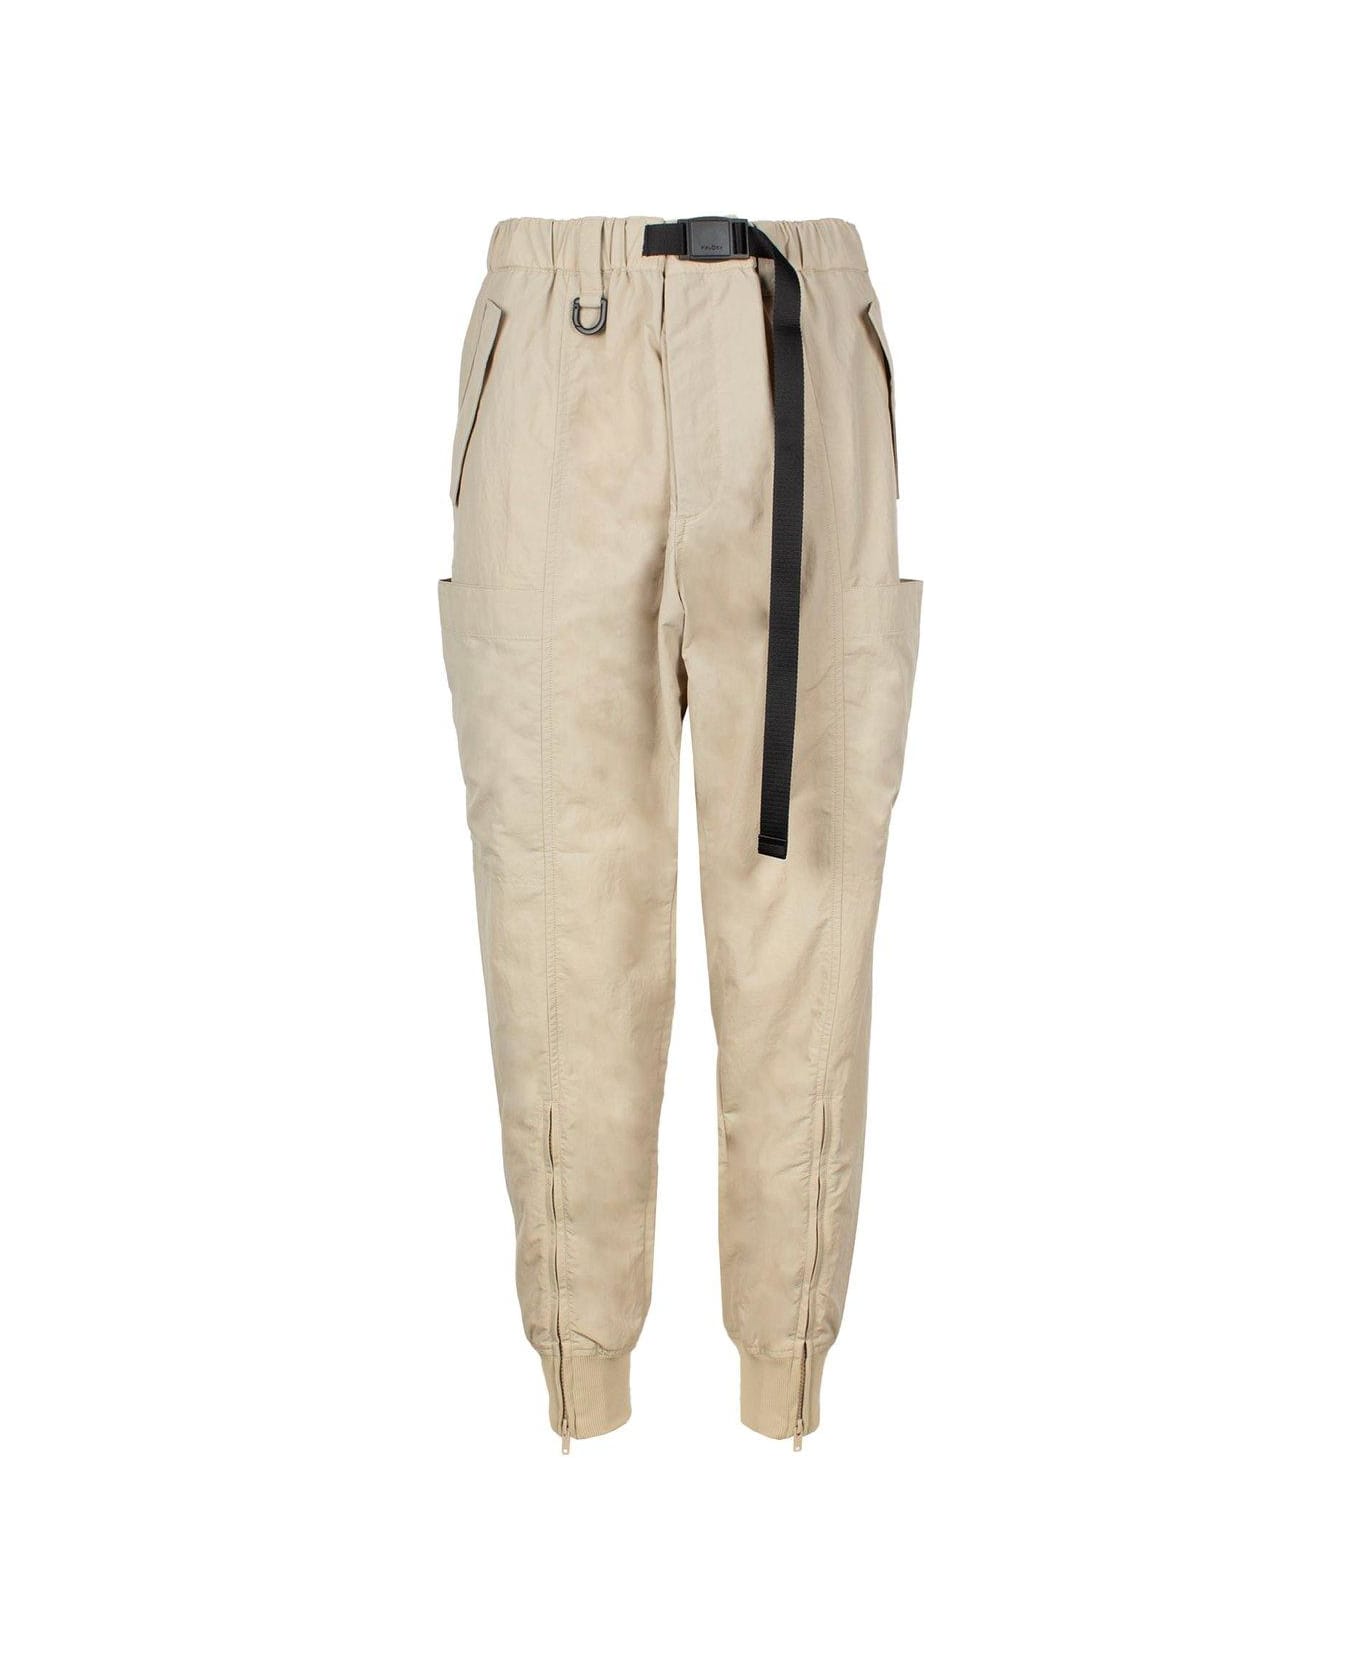 Y-3 Belted Crinkled Track Pants スウェットパンツ